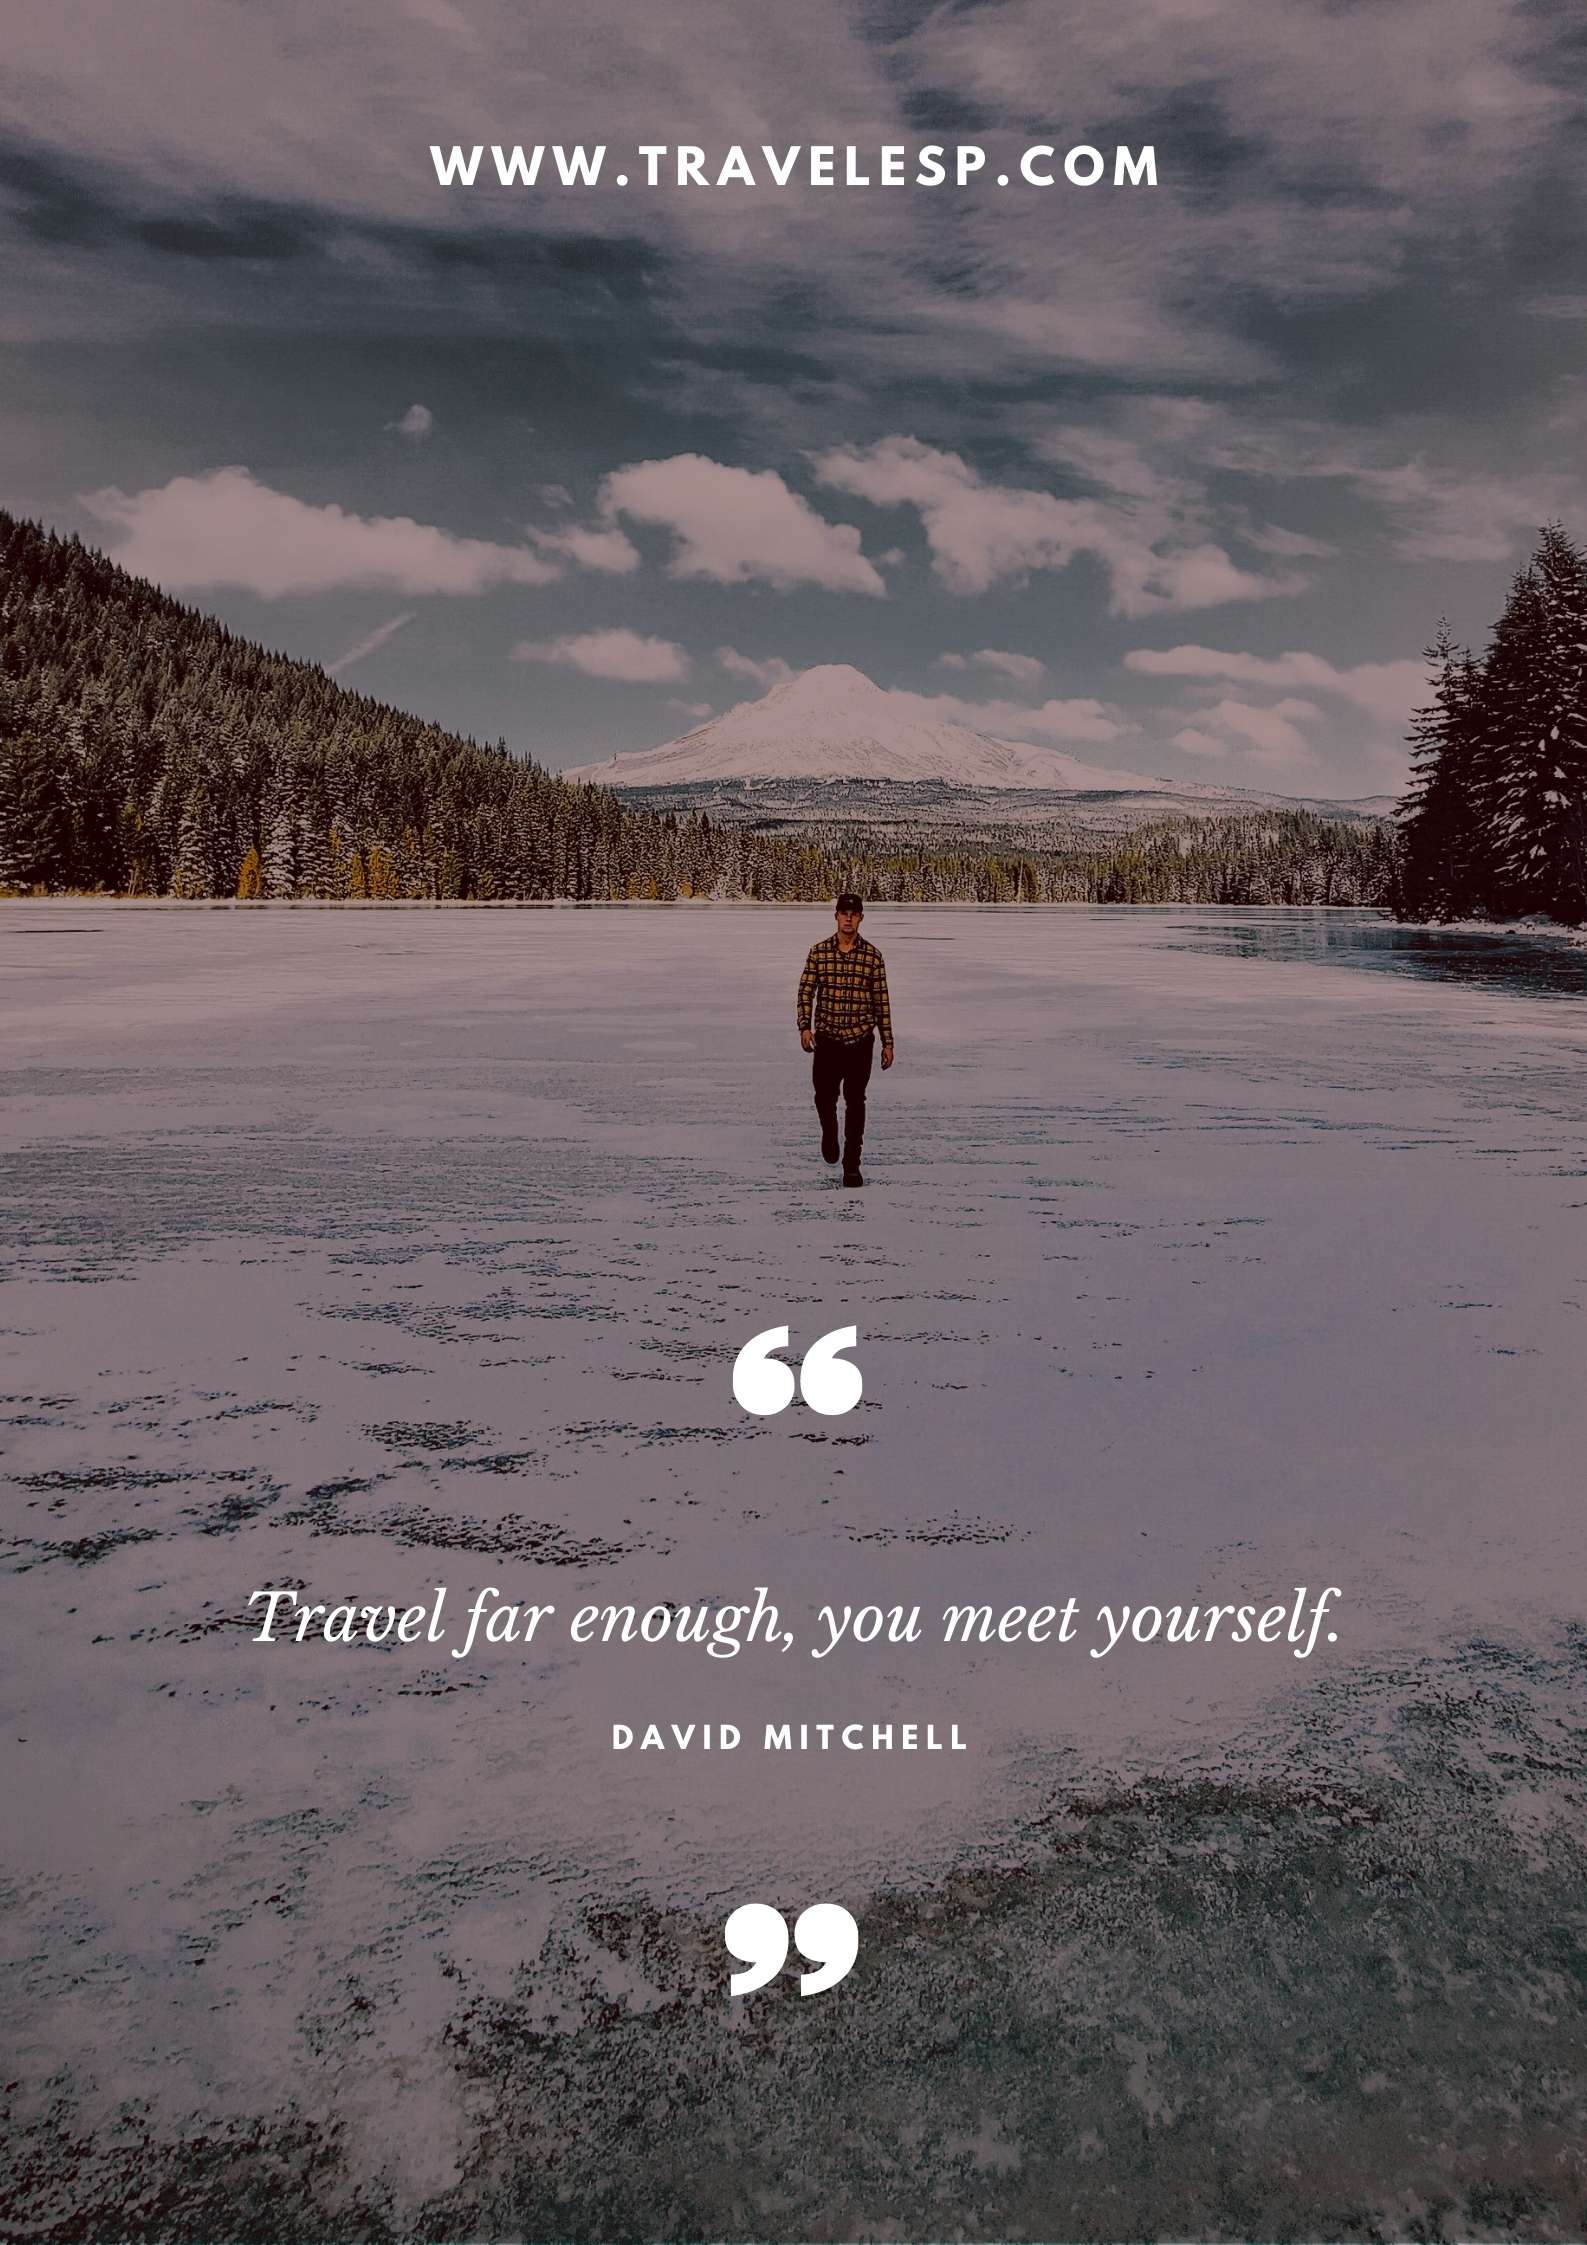 Travel Quotes for Instagram